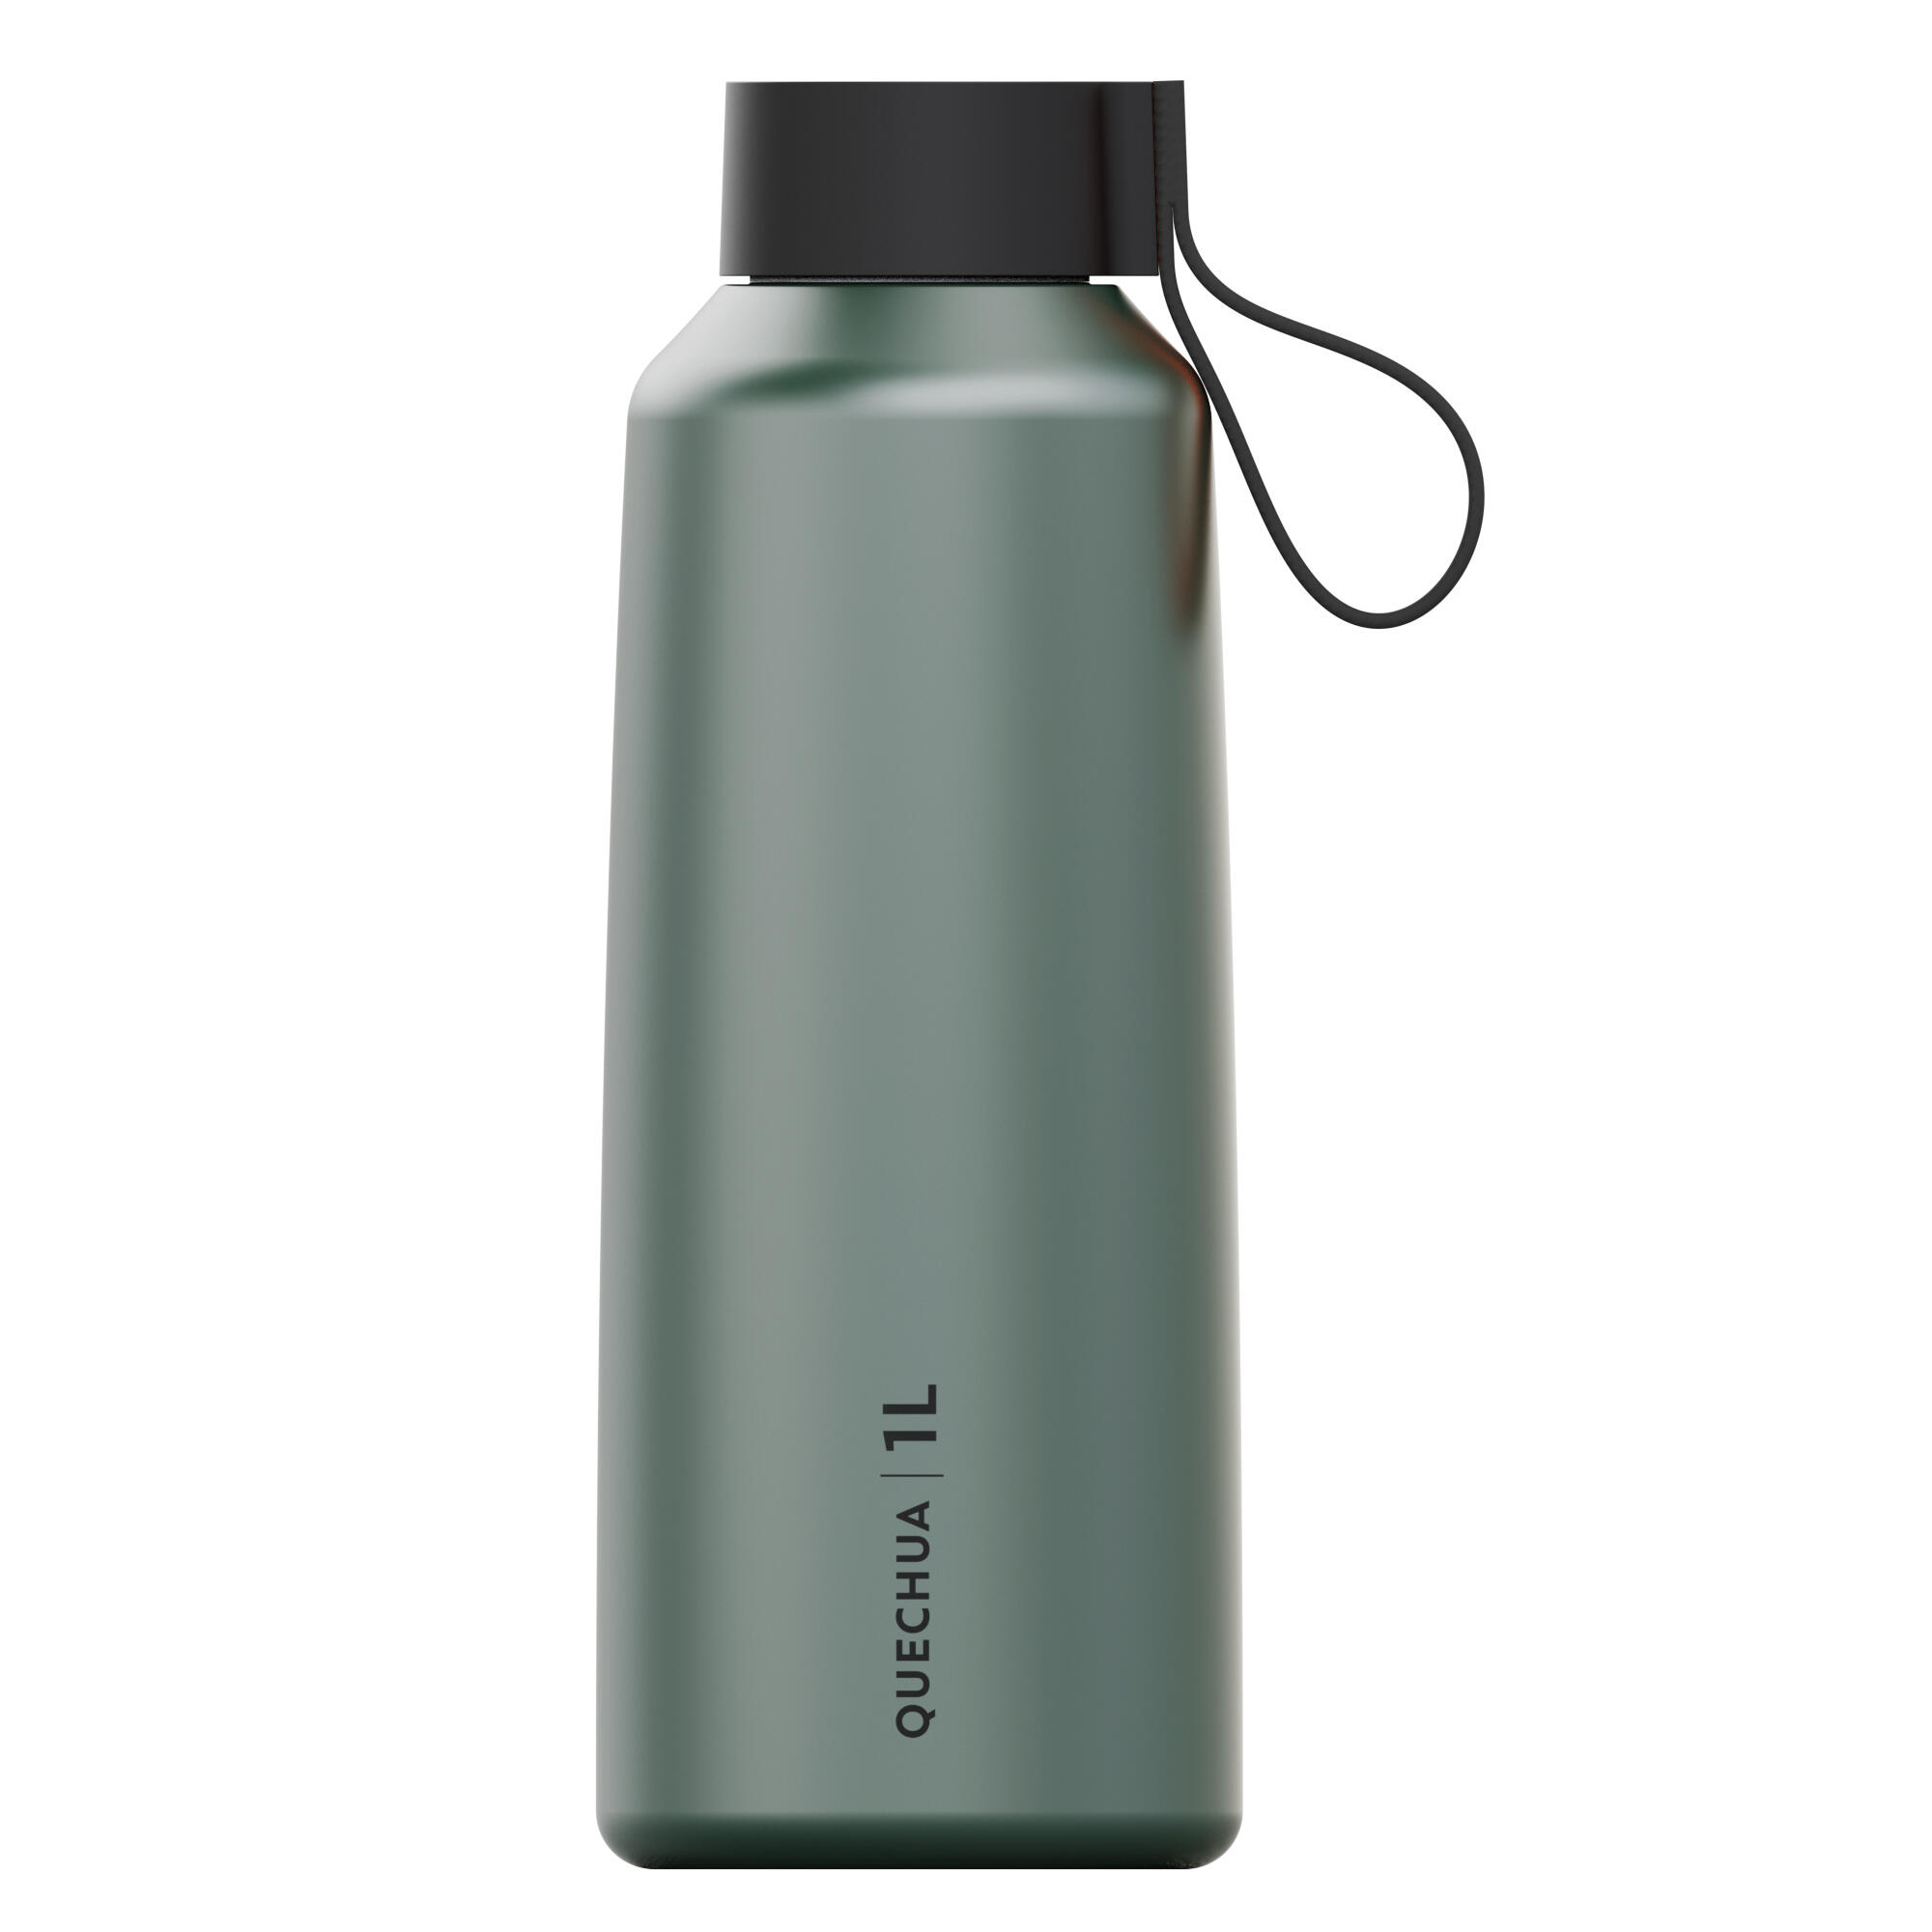 Stainless steel flask with screw cap for hiking 1 L - green 11/11